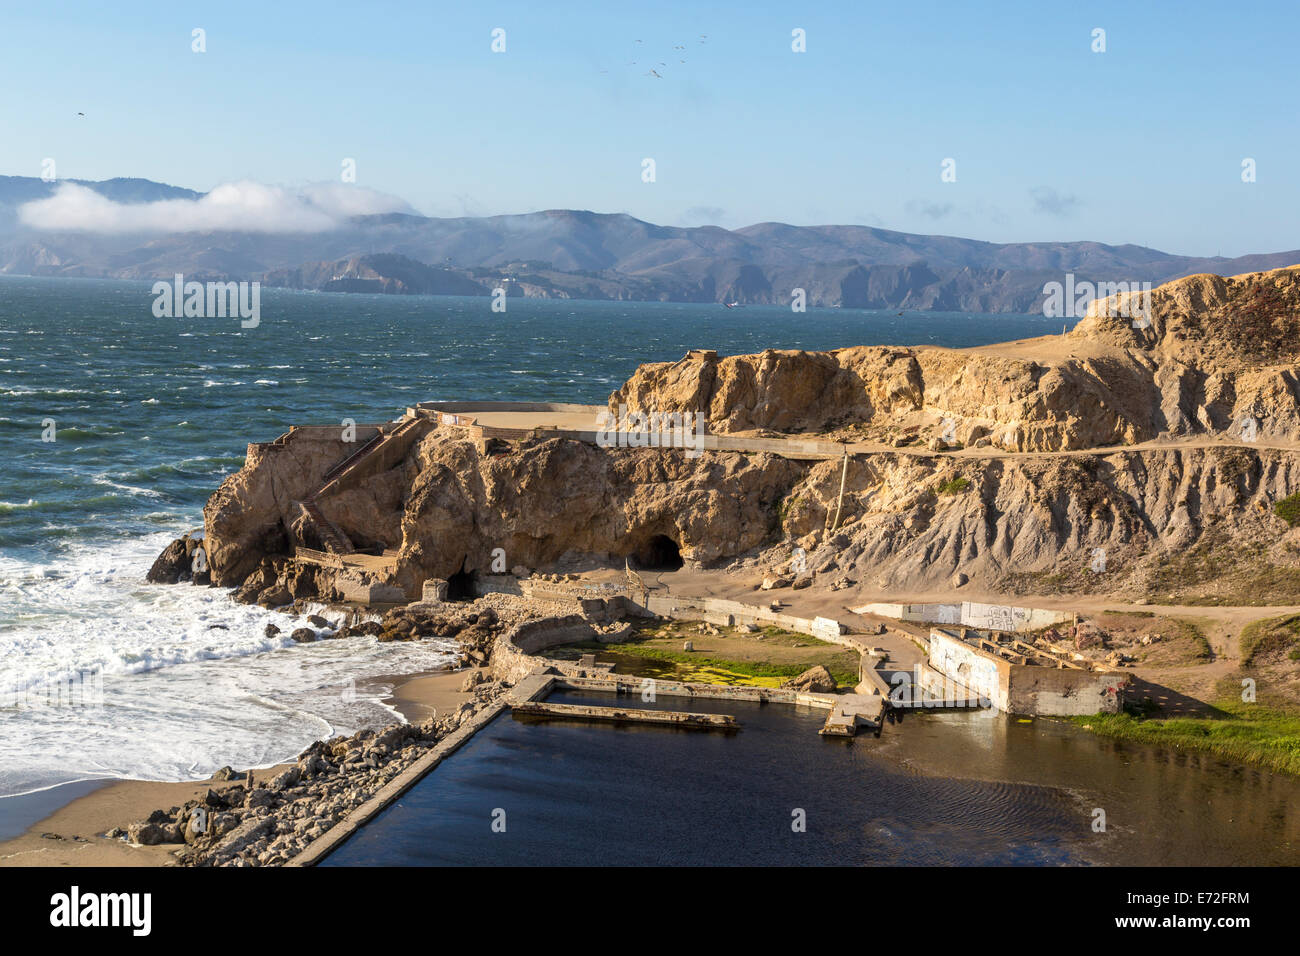 Ruins of the Sutro baths along the Pacific Oceans at Lands End in San Francisco, California, USA. Stock Photo